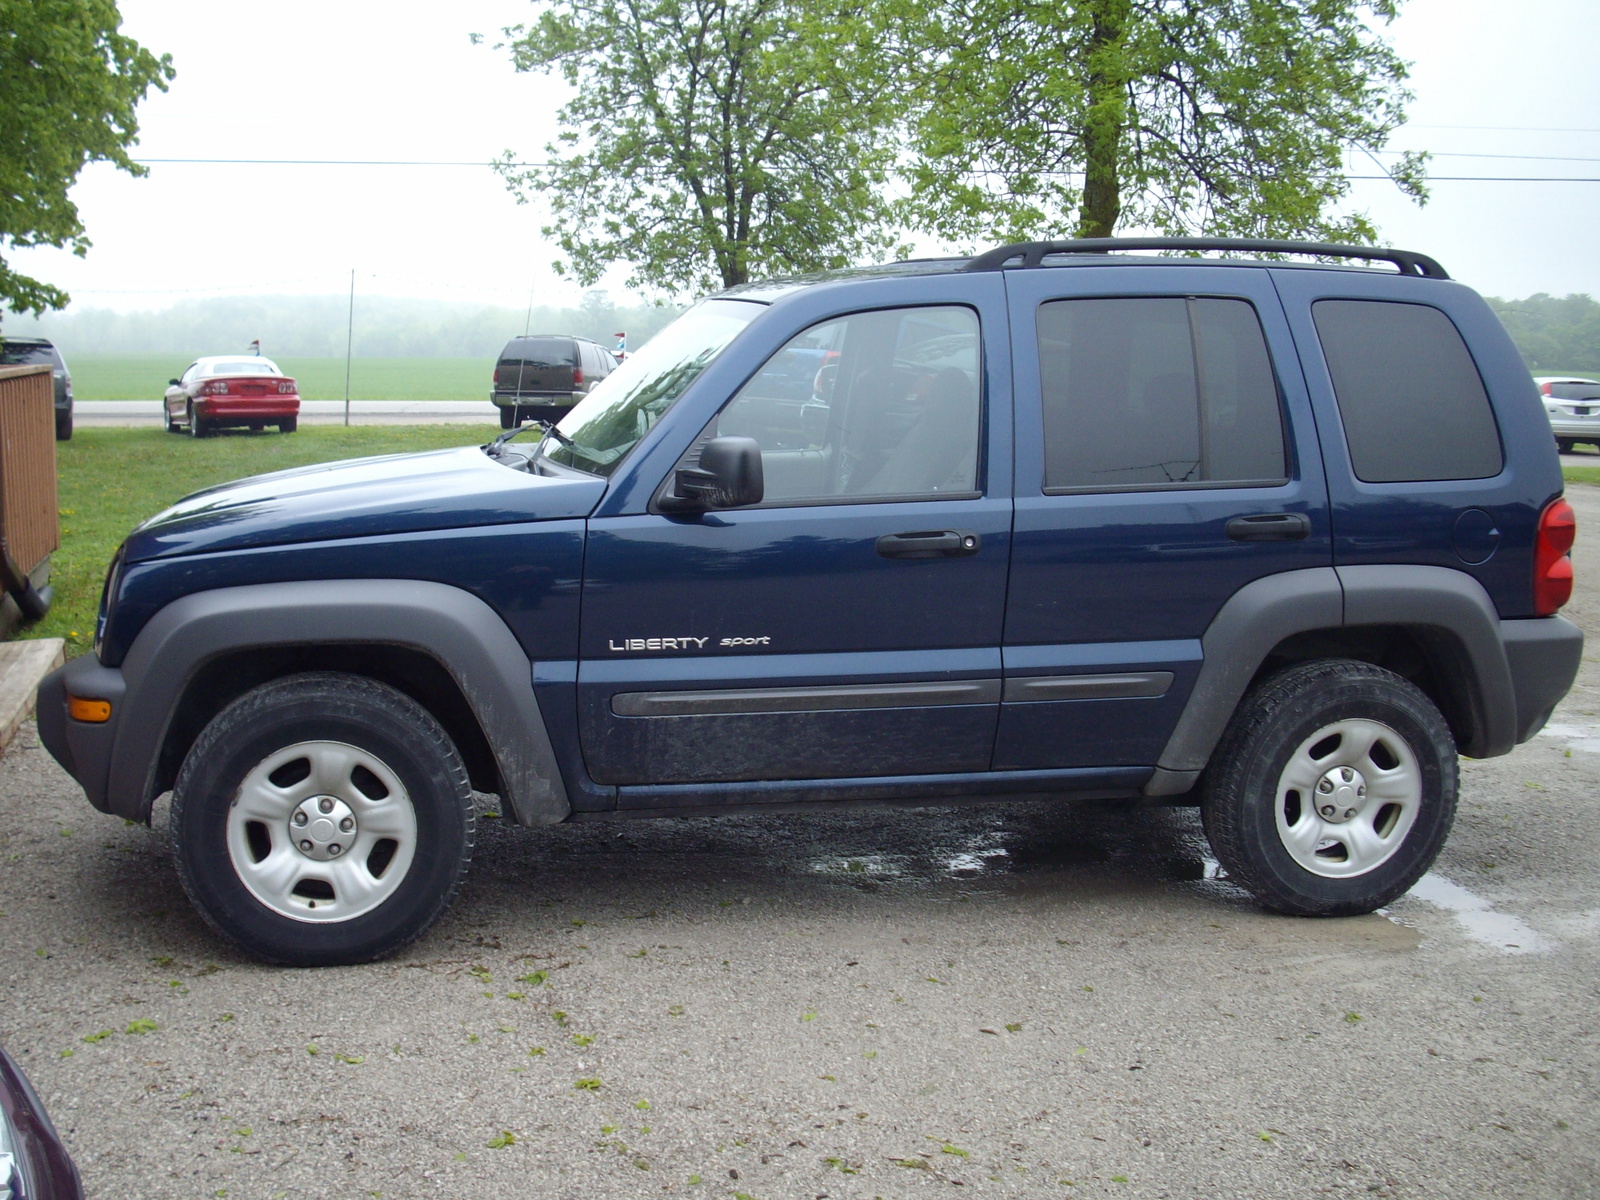 2003 Jeep liberty sport safety ratings